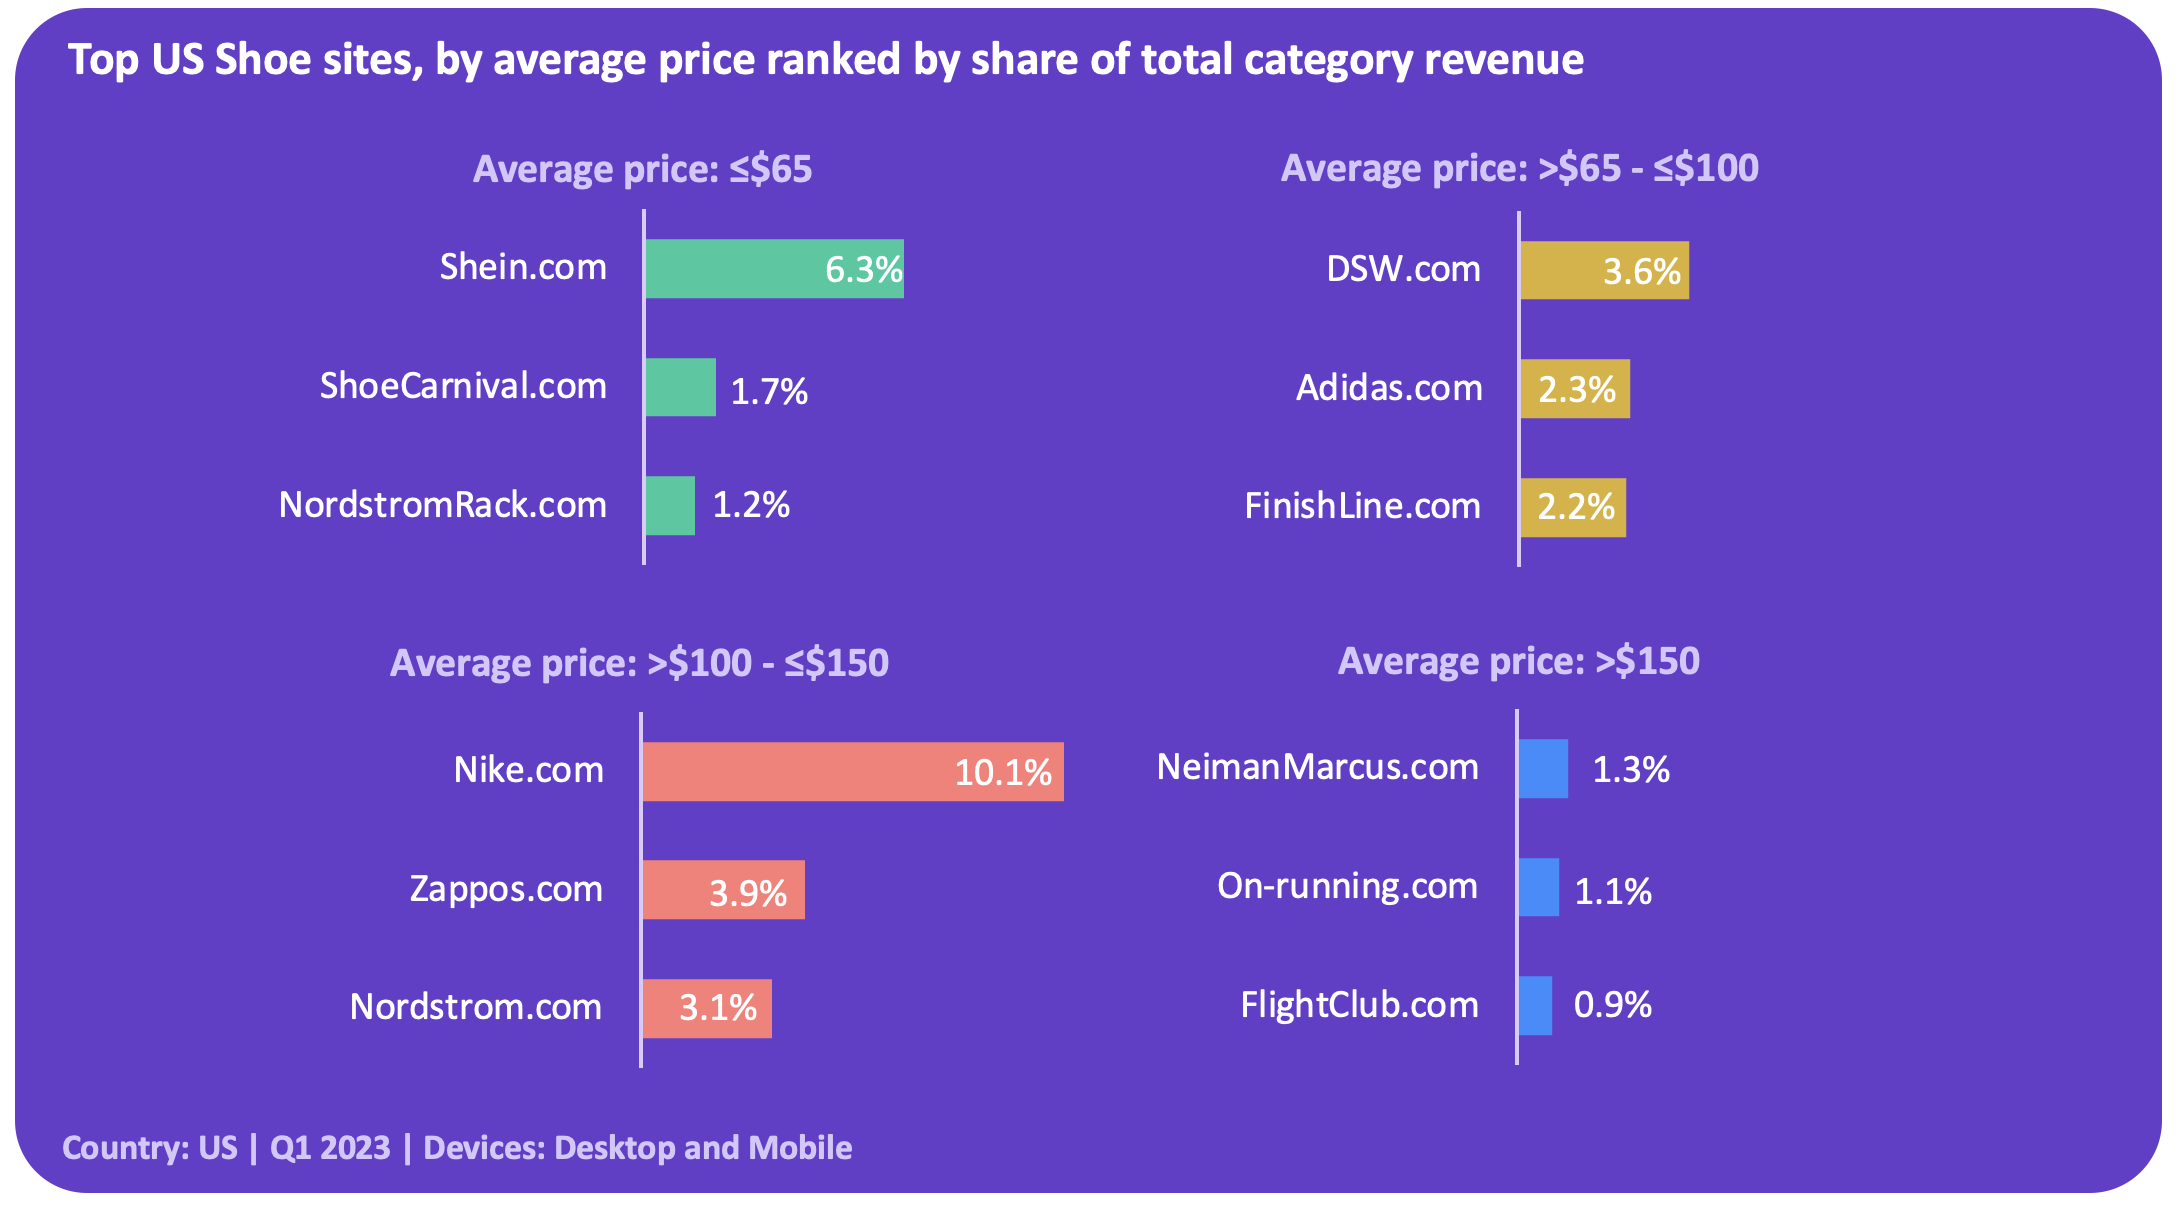 Top US Shoe sites, by average price ranked by share of total category revenue